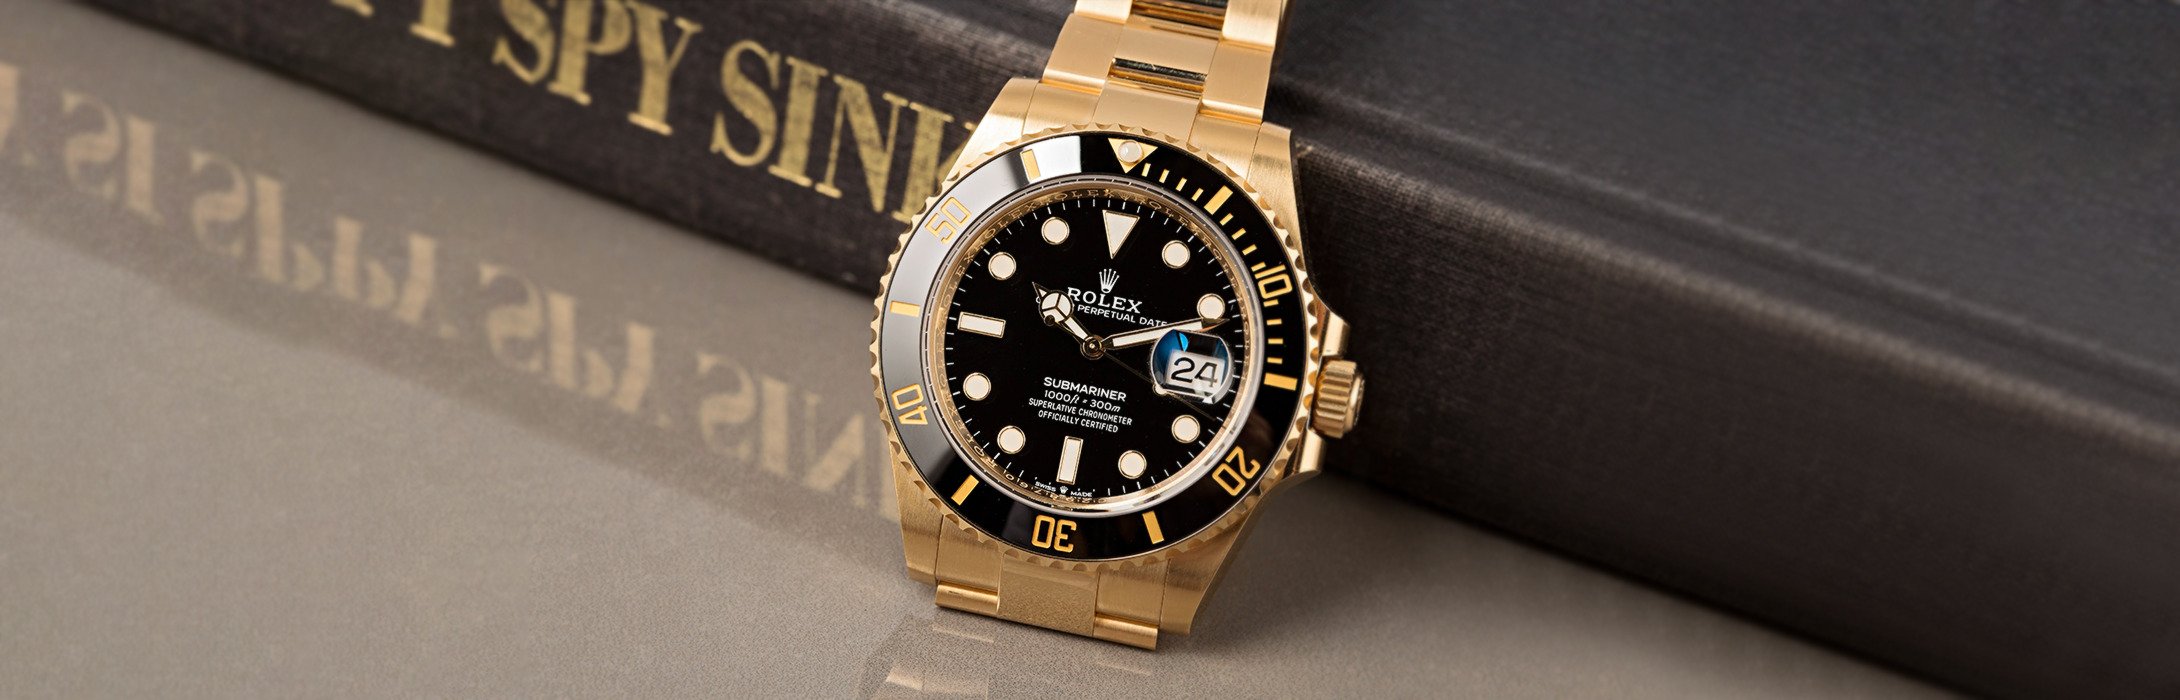 Rolex Submariner Date buying Guide